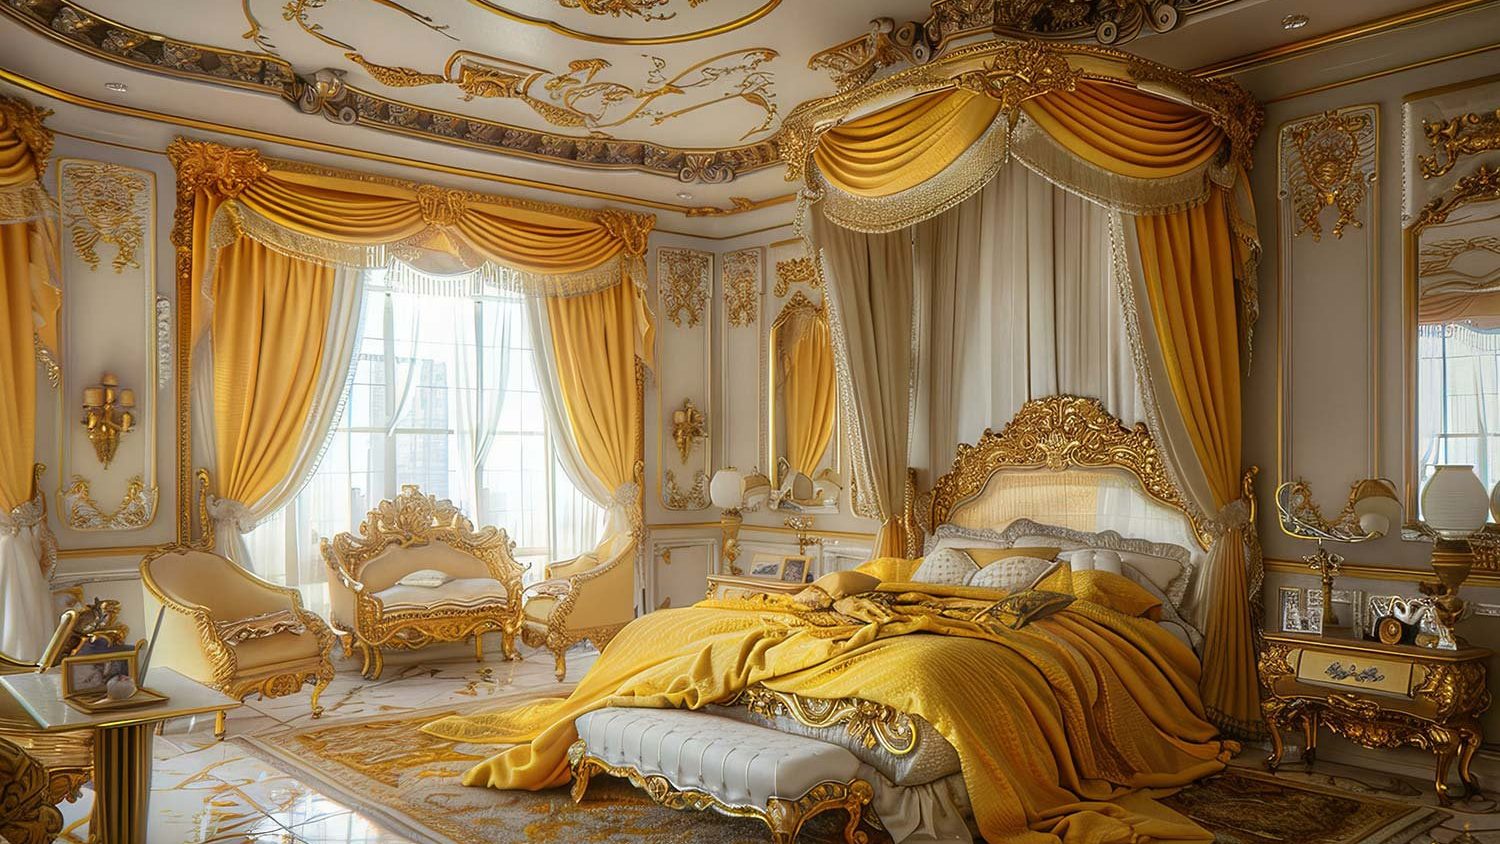 Luxurious Royal Bedroom in Opulent Baroque Style with Golden Accents